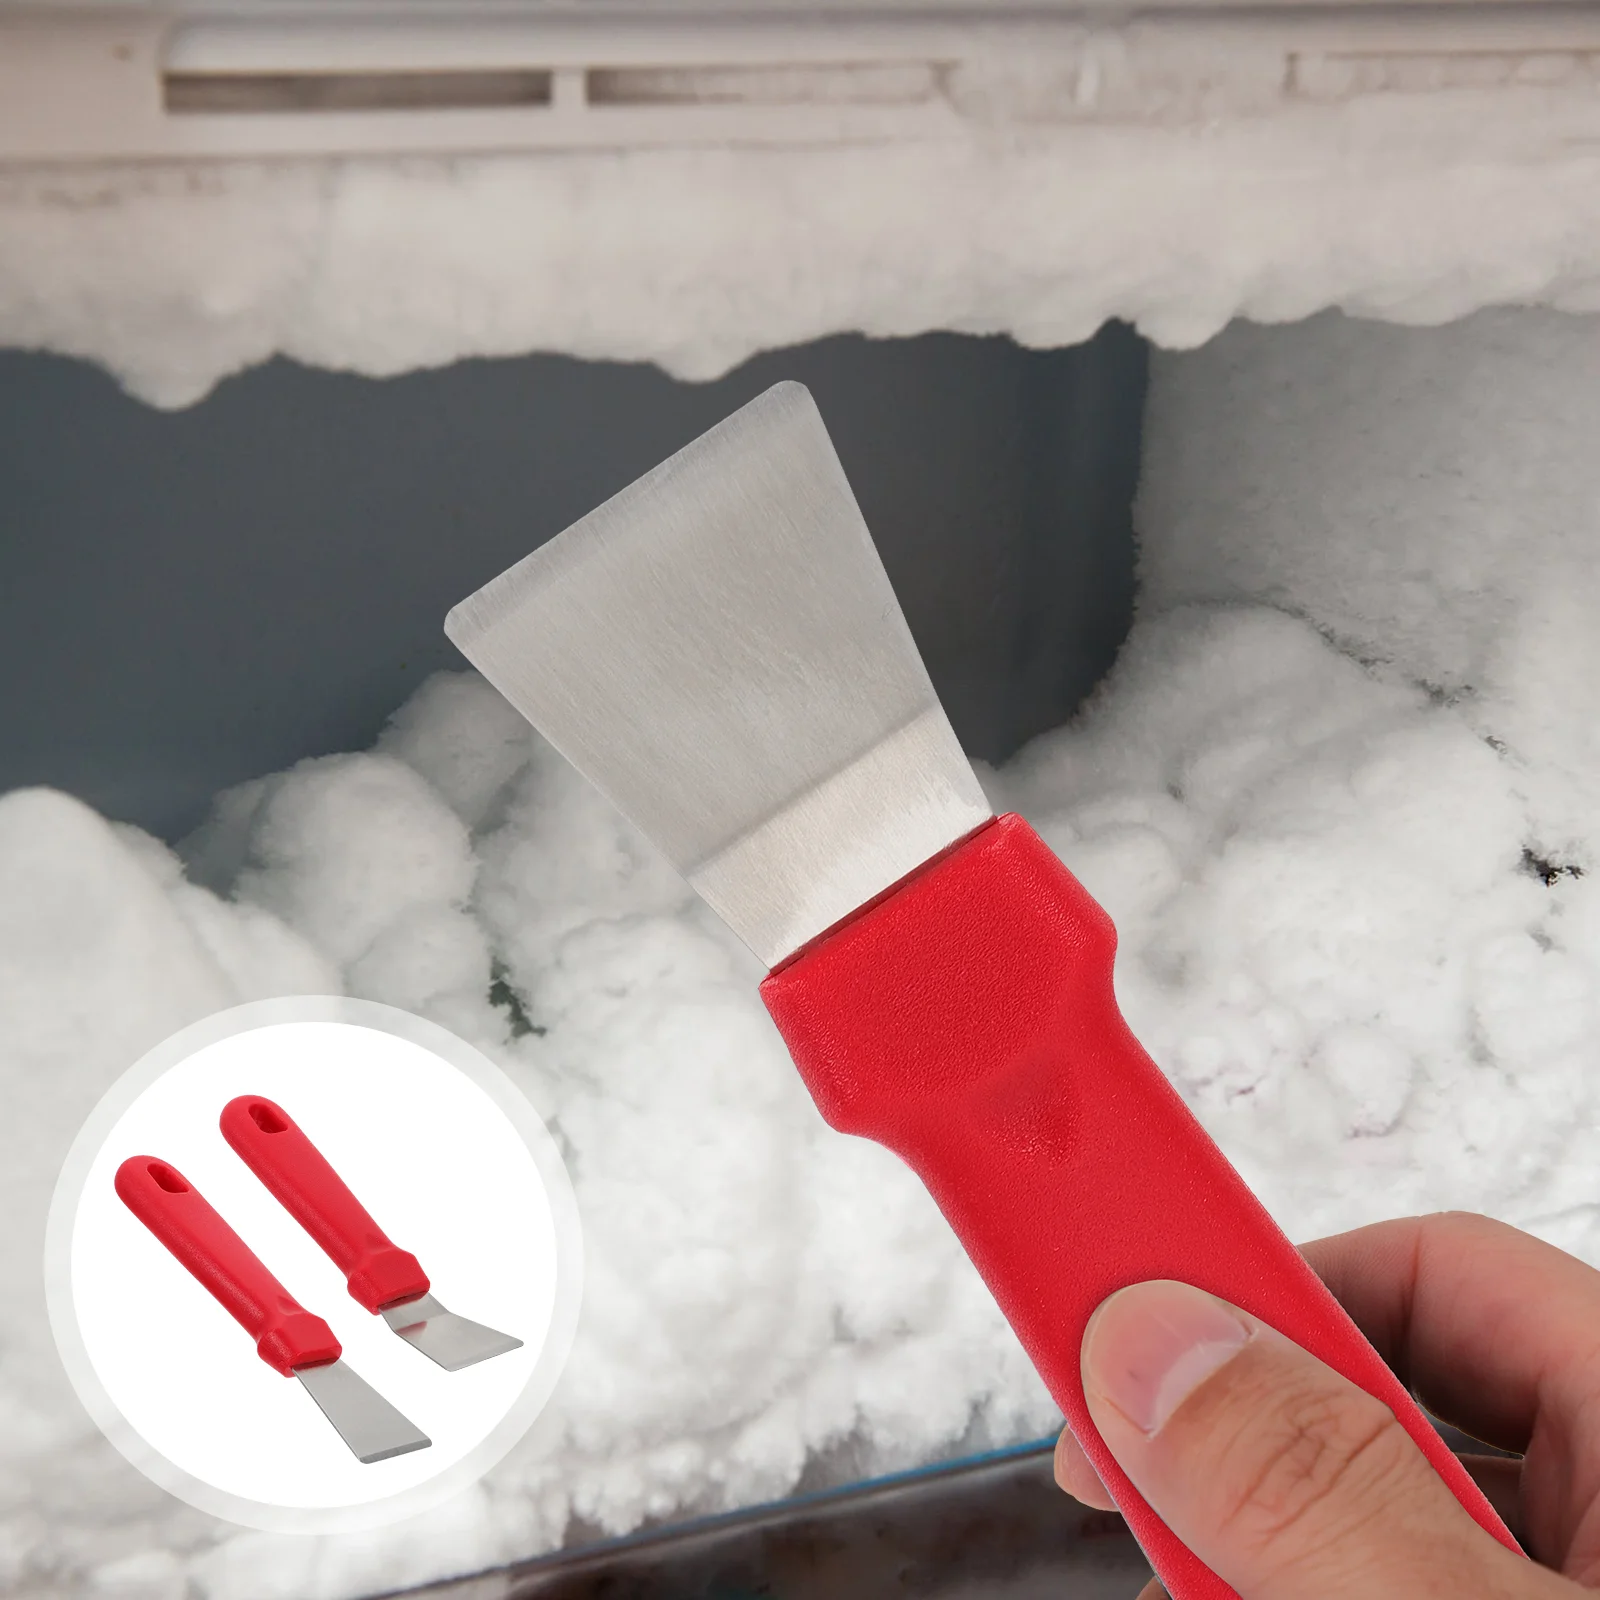 

Ice Remover Refrigerator Scraper Freezer Scoop Fridge Removal Snow Tool Cleaning Defrosting Frost Deicing Scooper Stainless